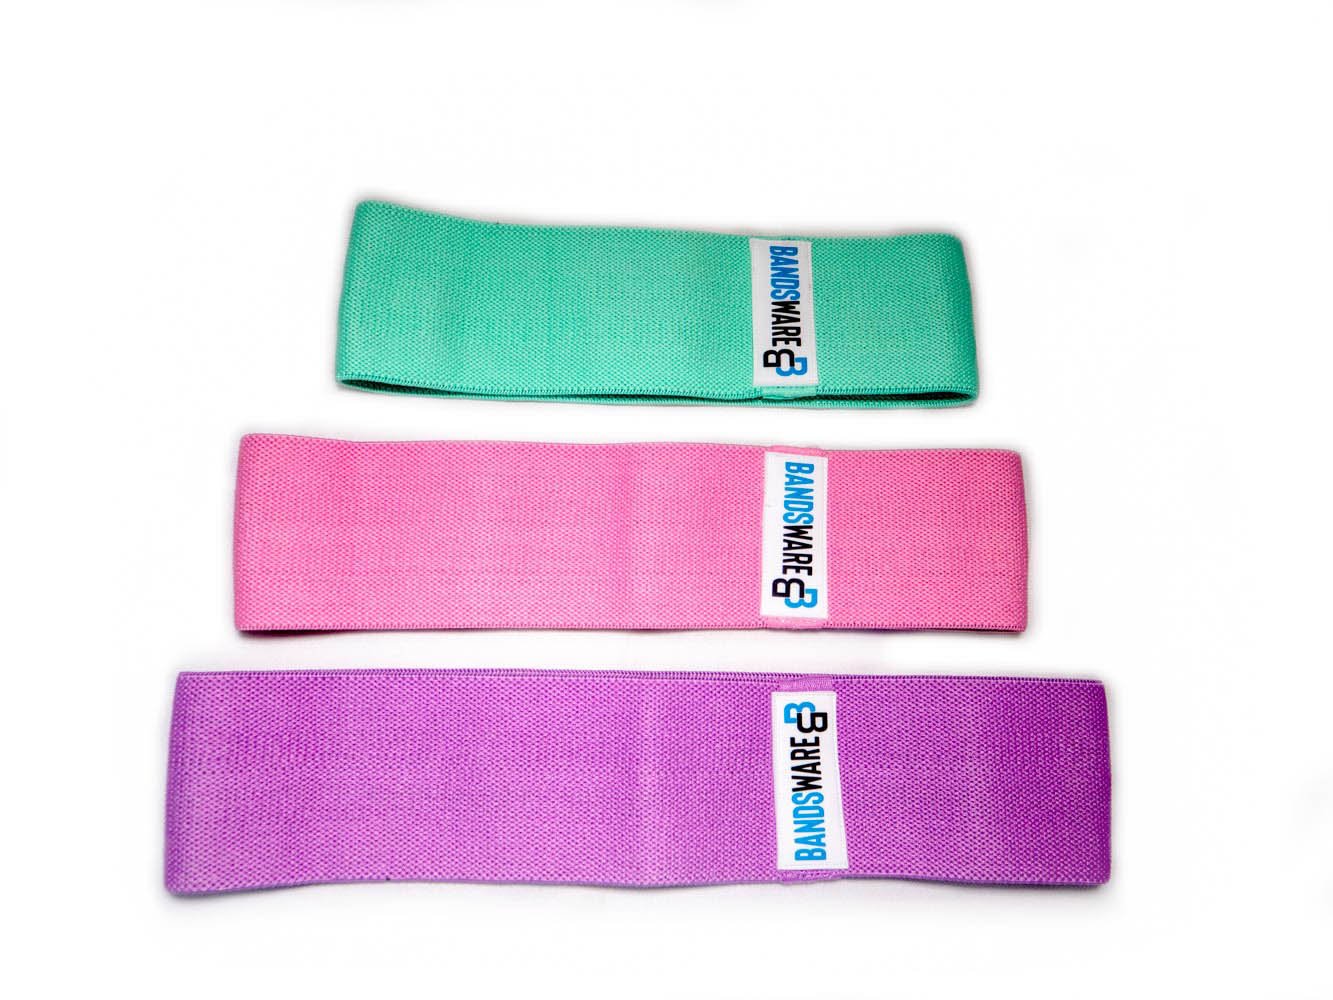 Booty_Bands_Color_August_2020 (3 of 3)